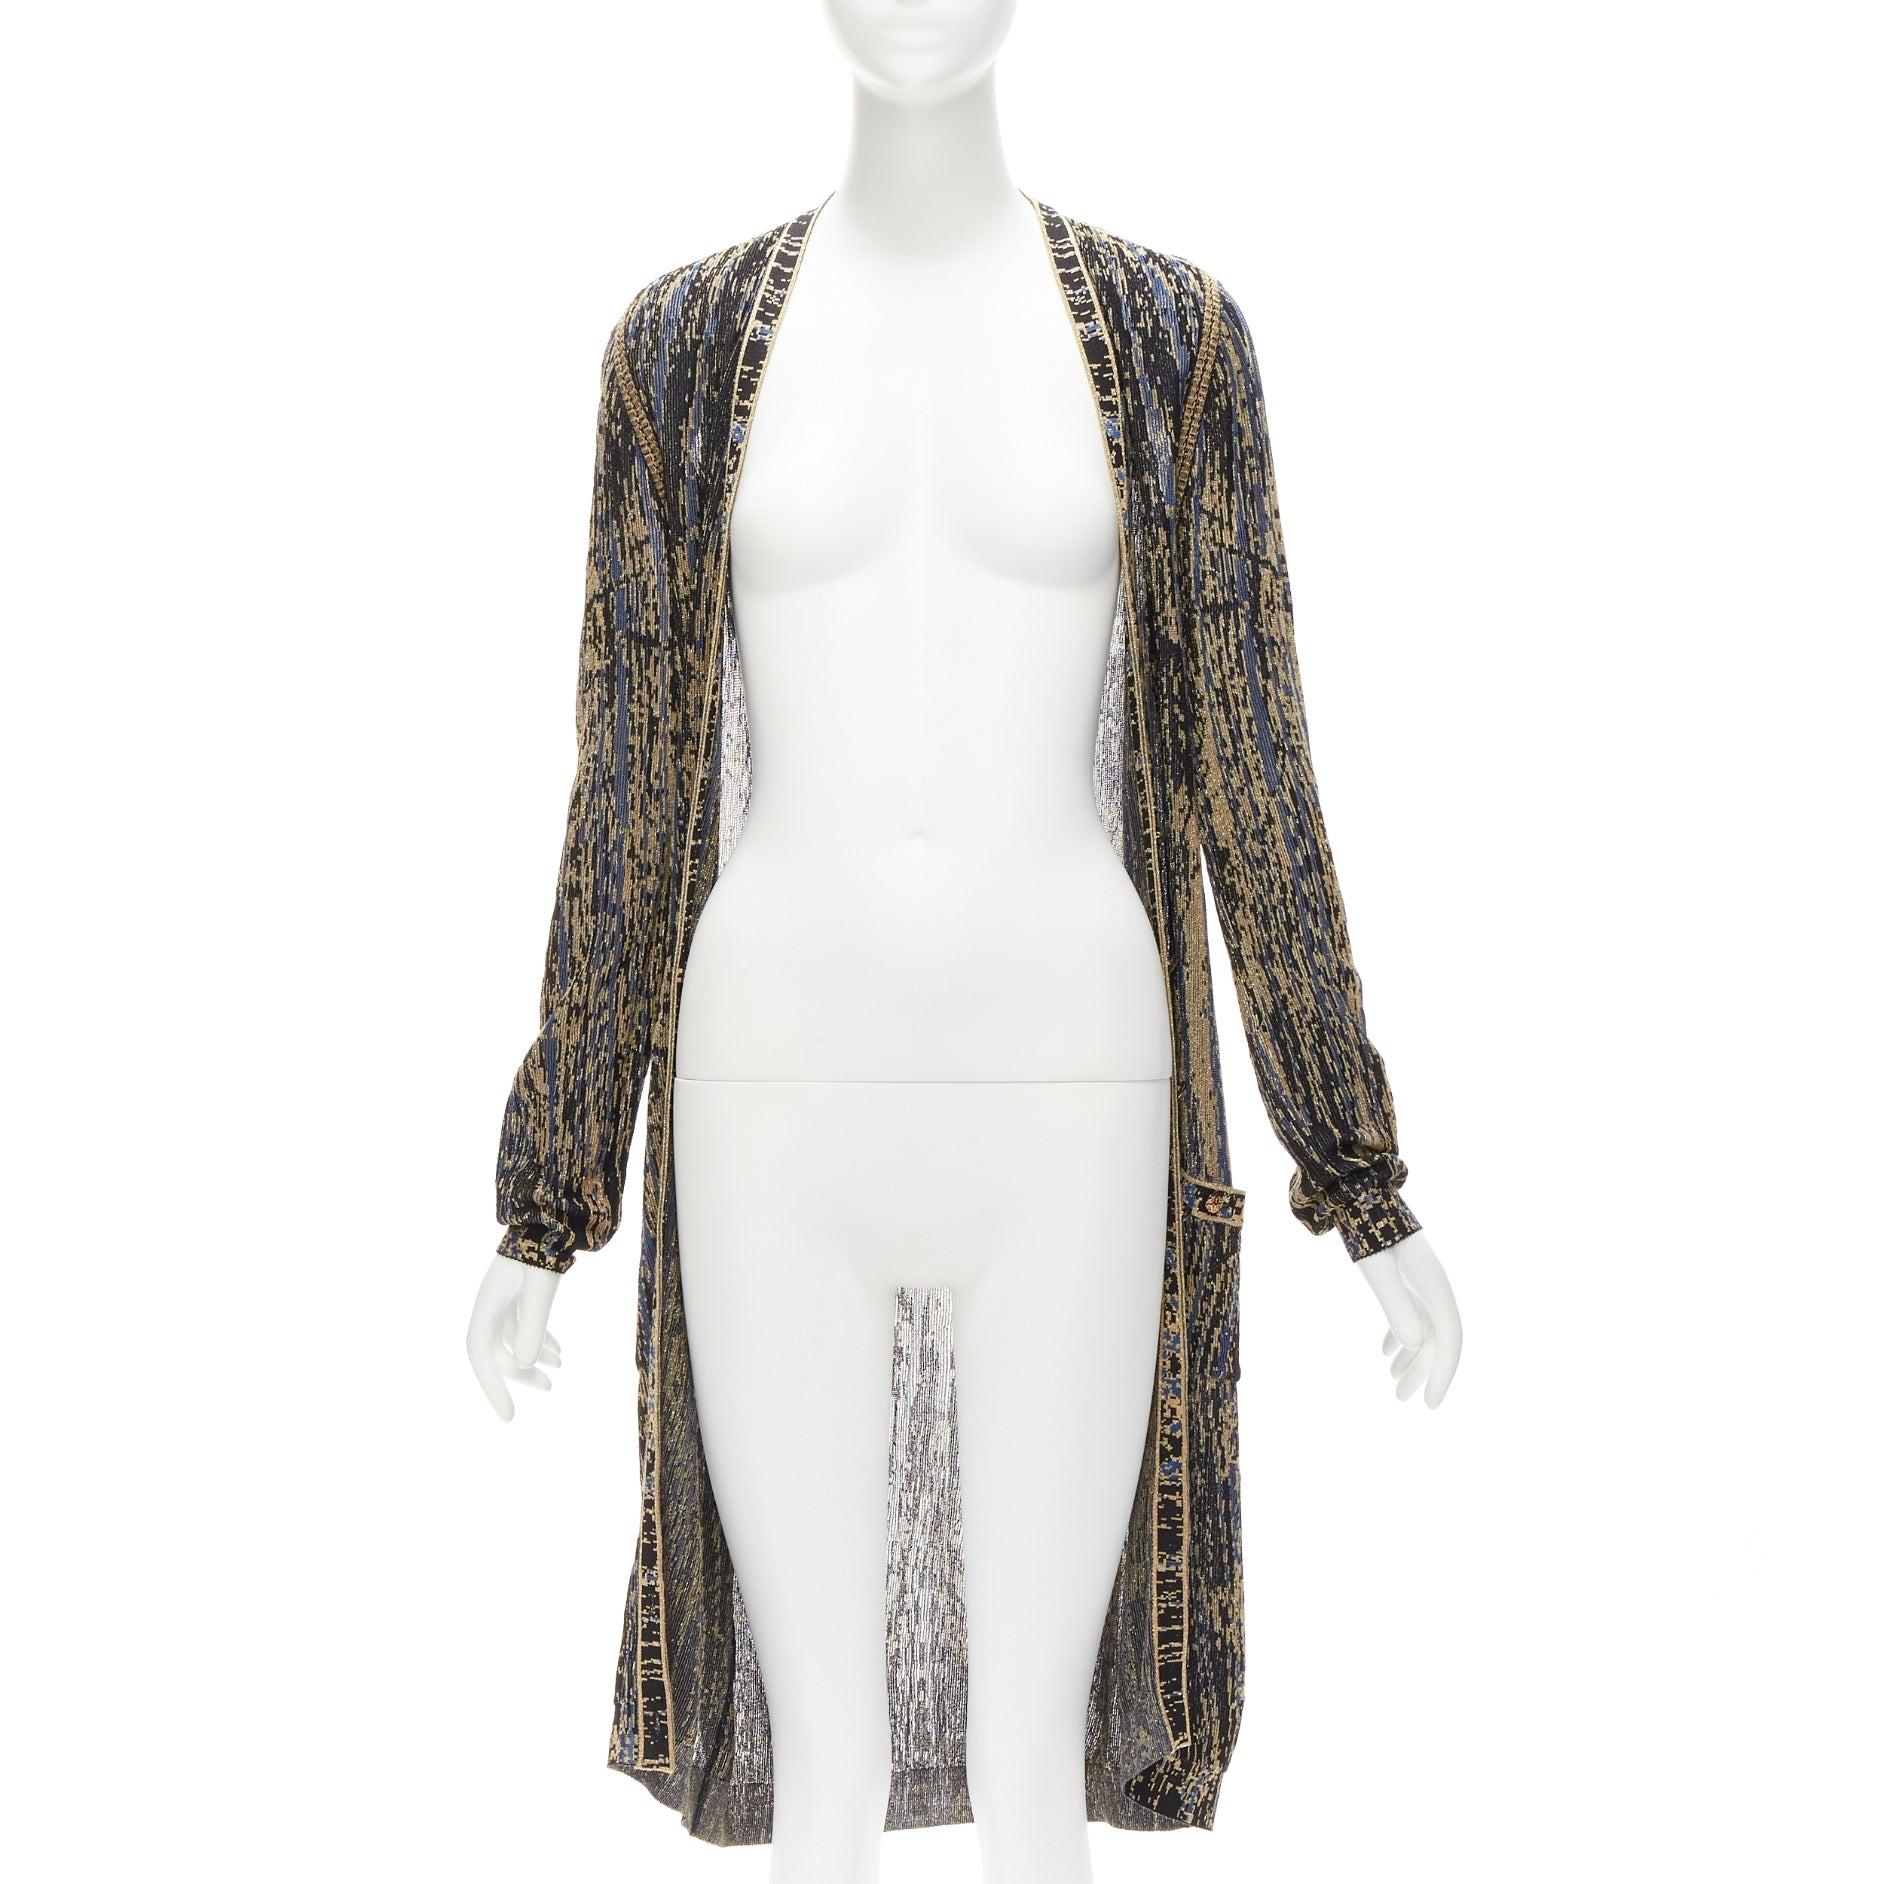 CHANEL gold black blue metallic lurex long cardigan sweaer FR38 M
Reference: NKLL/A00009
Brand: Chanel
Designer: Karl Lagerfeld
Material: Rayon, Blend
Color: Gold, Black
Pattern: Abstract
Closure: Button
Extra Details: Back CC logo at nape.